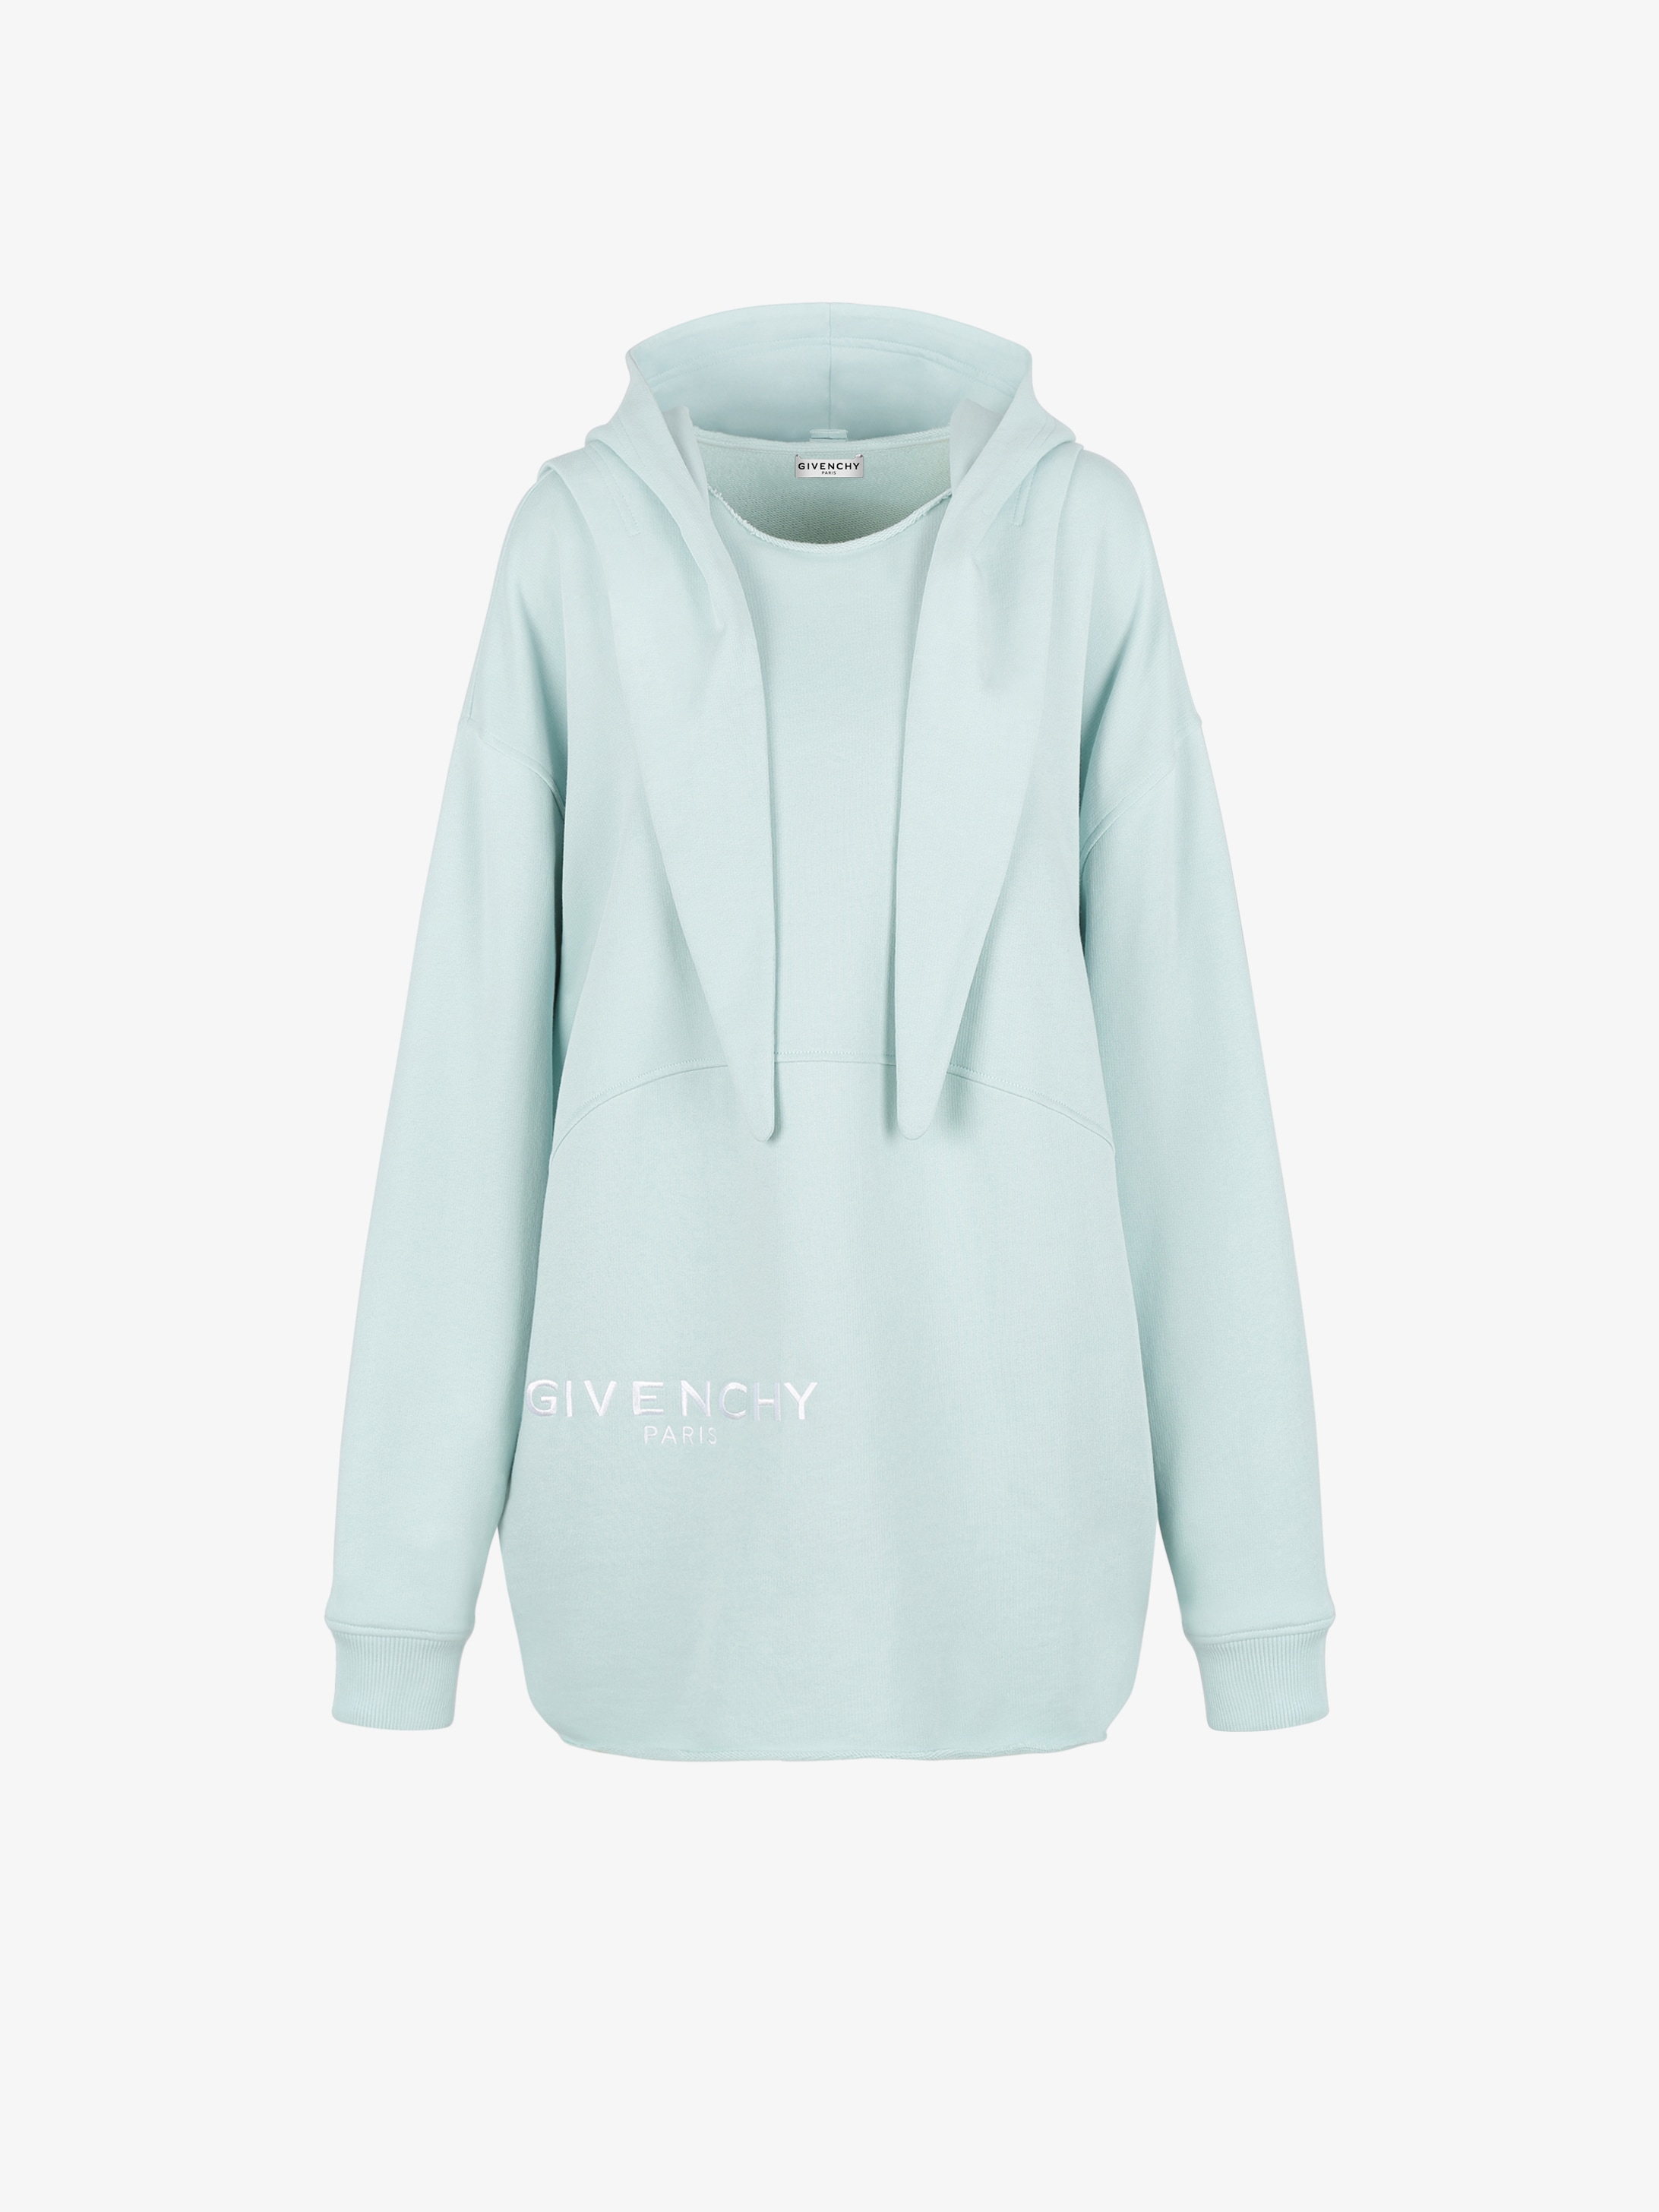 givenchy grey hoodie